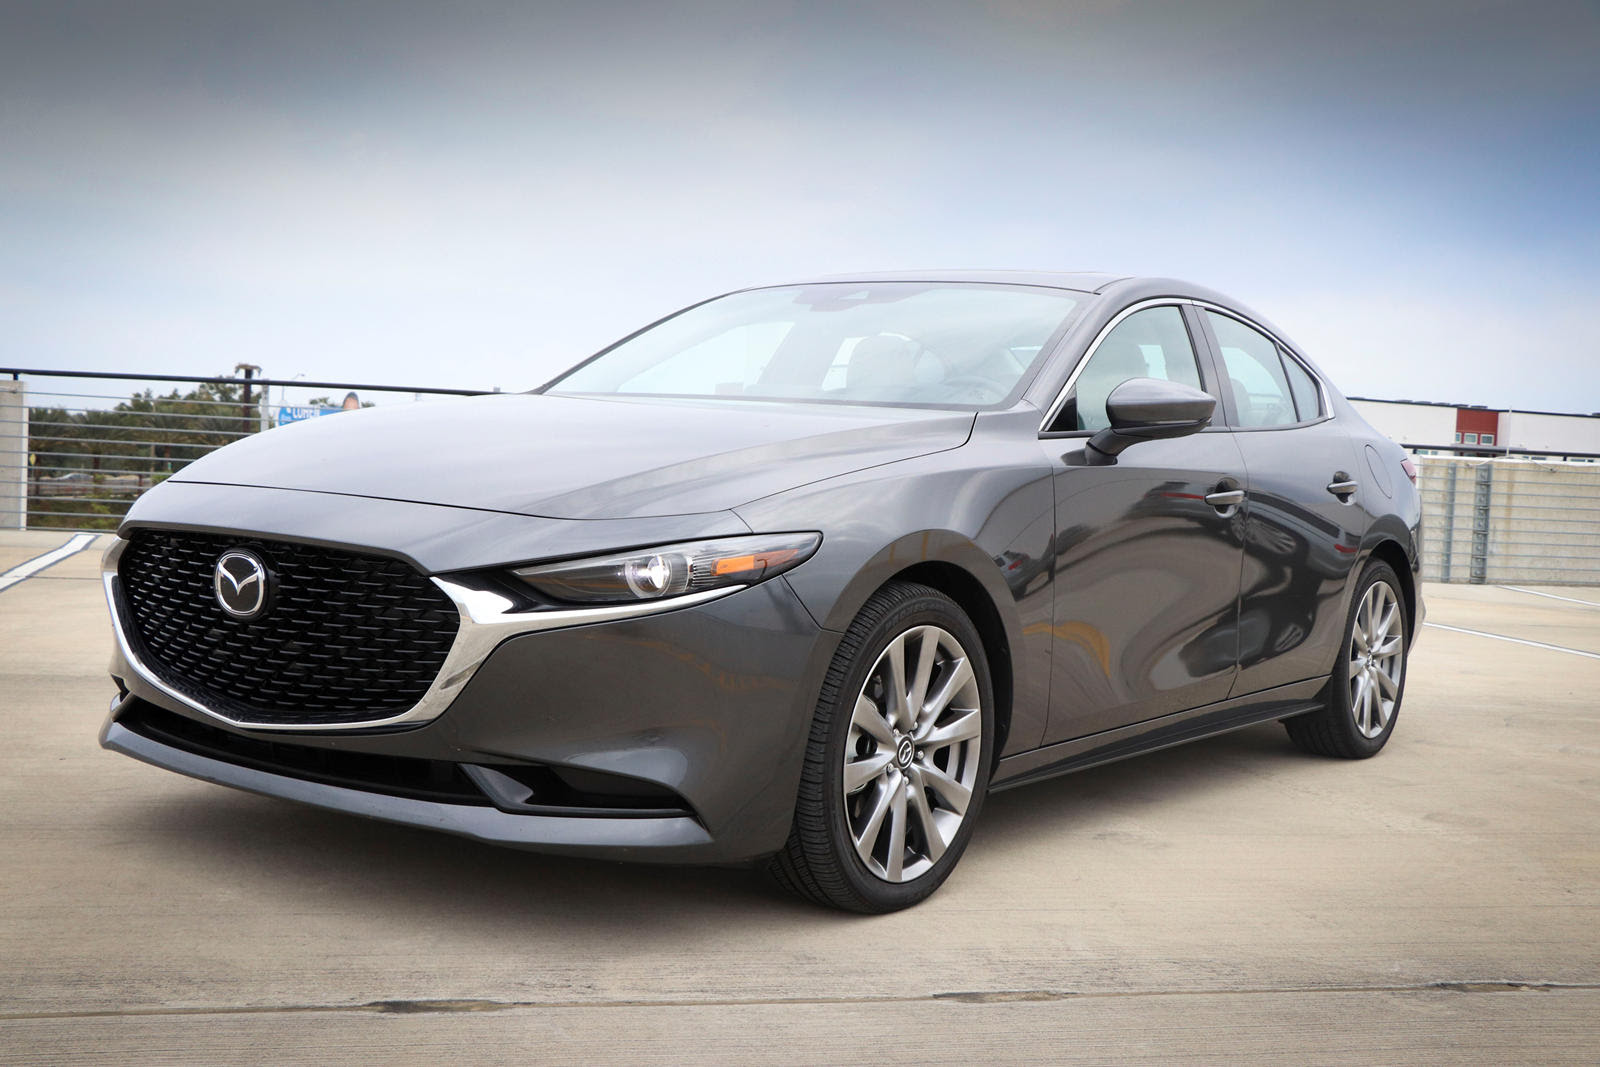 Both engines and gearbox options are available across the range, besides the top gt sport tech model which only comes with a petrol engine. 2020 Mazda 3 Sedan Review Trims Specs Price New Interior Features Exterior Design And Specifications Carbuzz